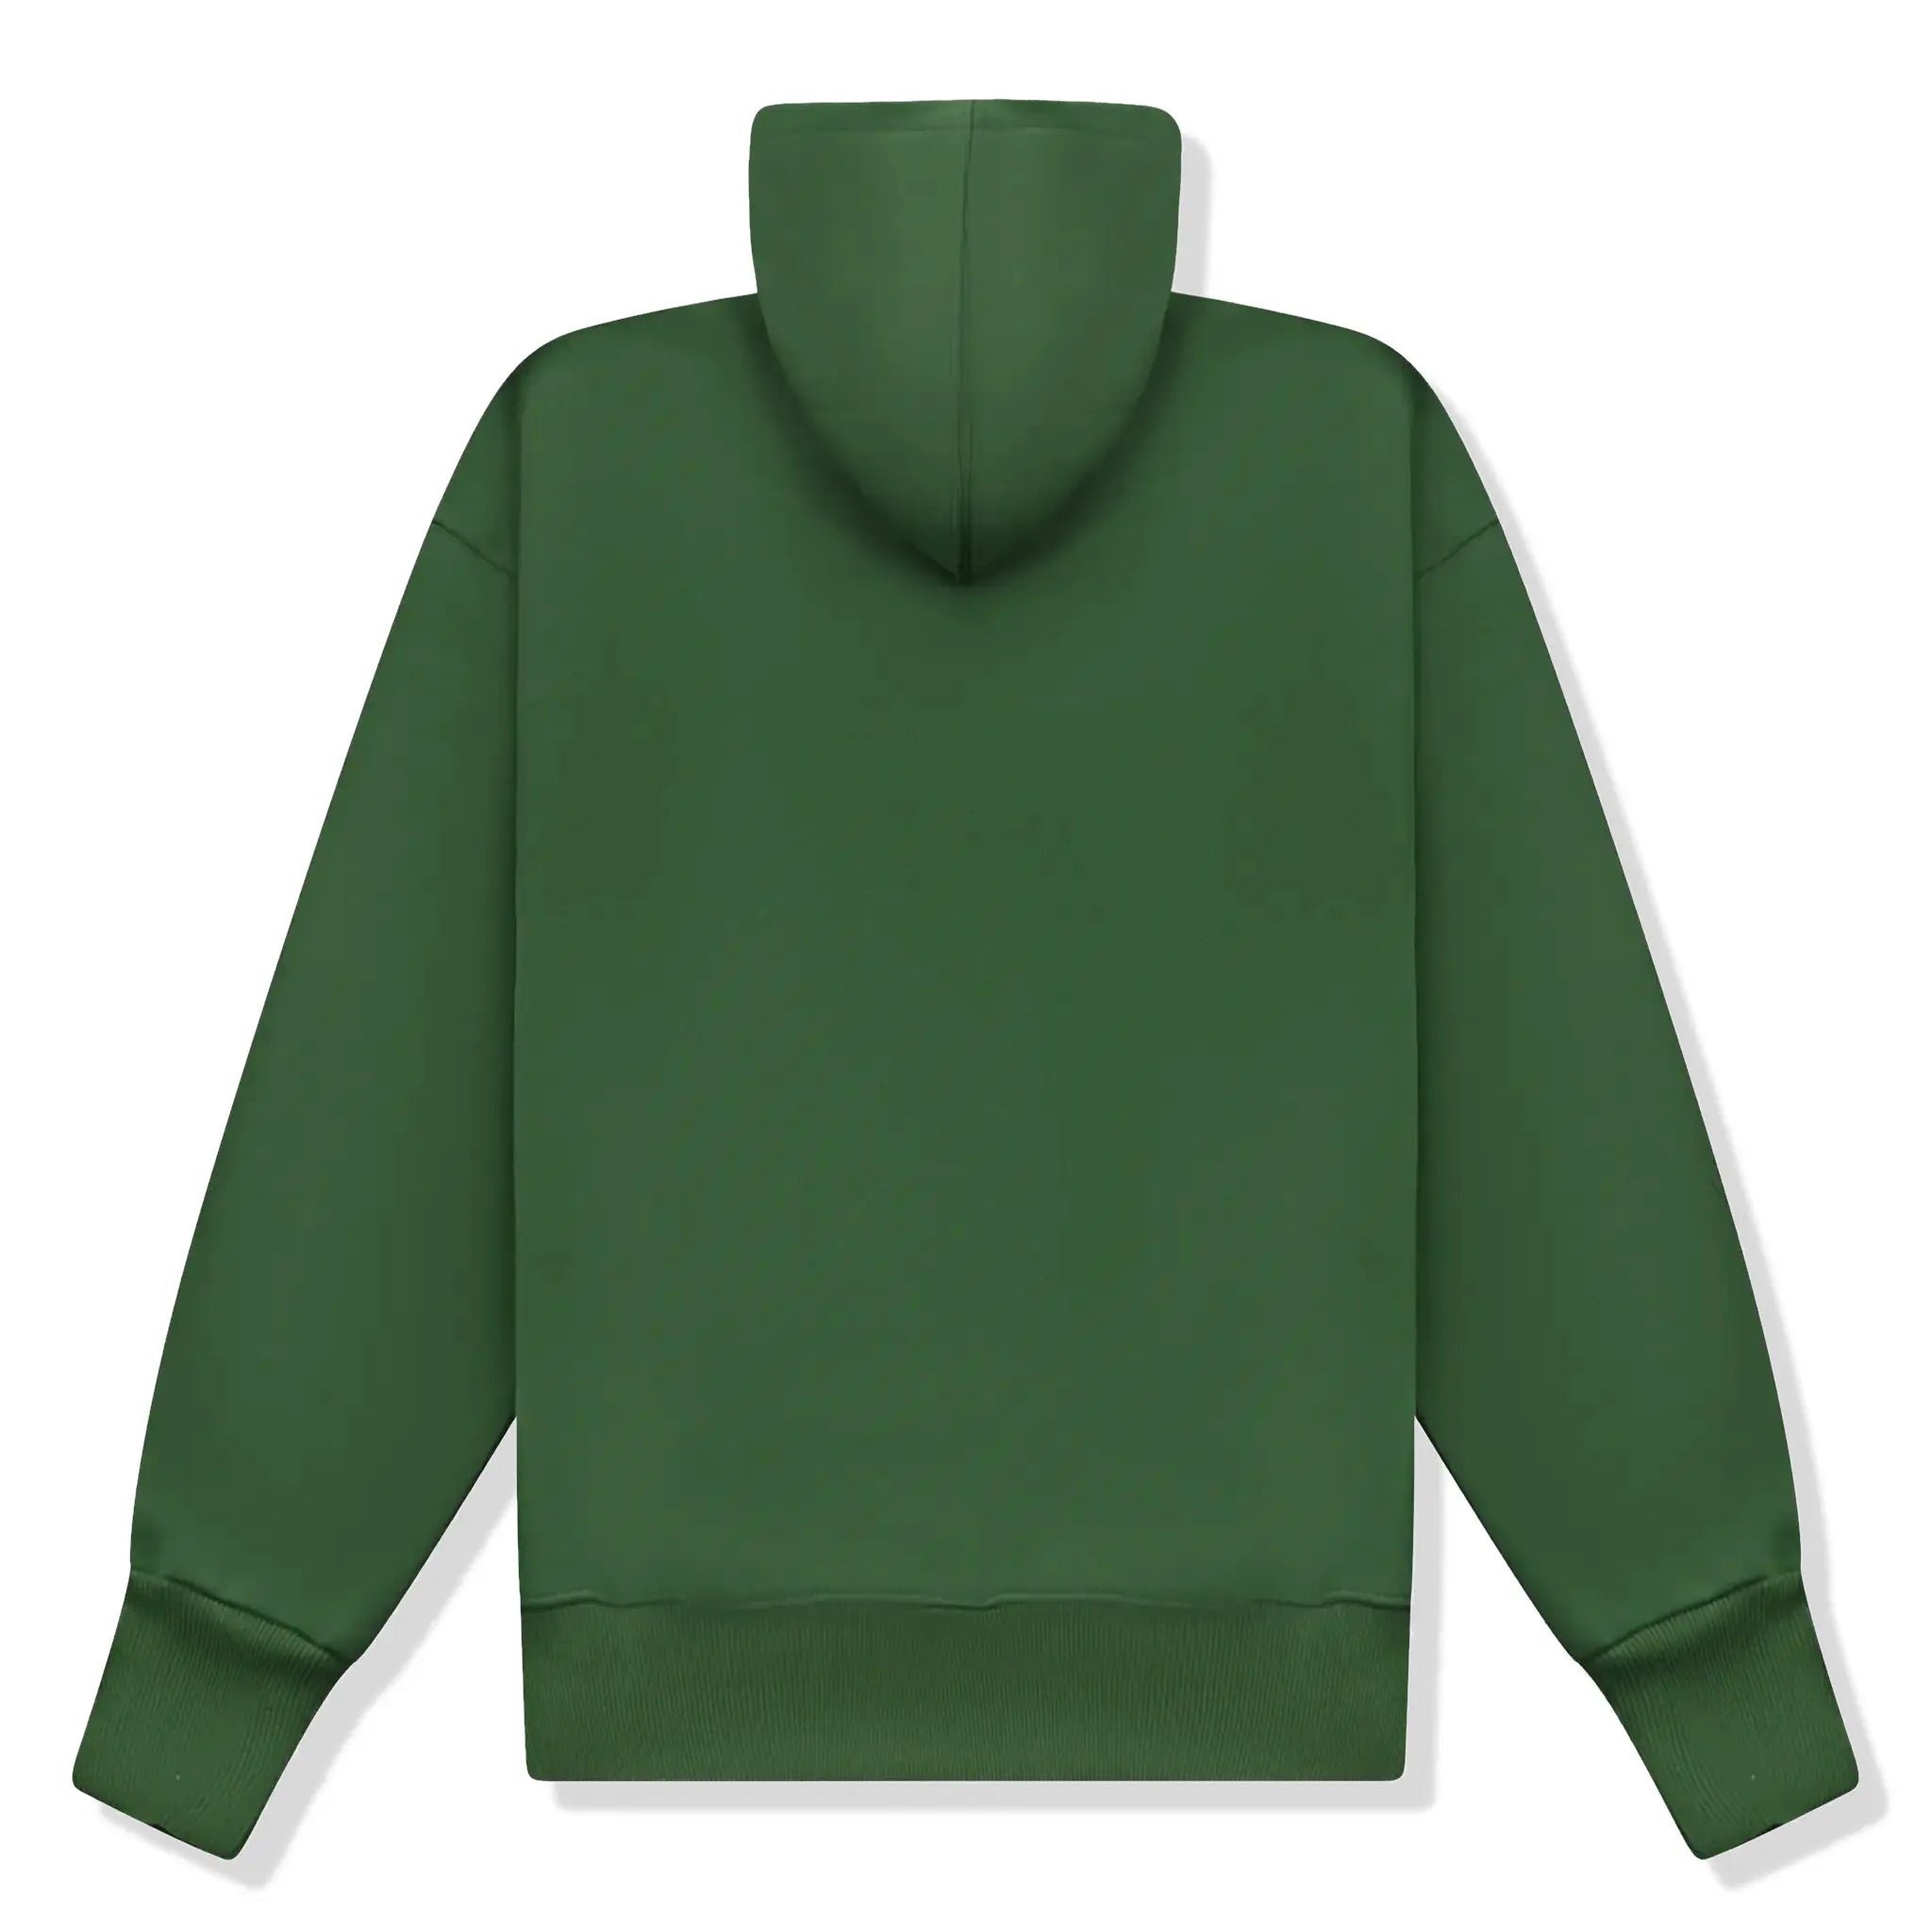 Back view of Drama Call Green White Hoodie